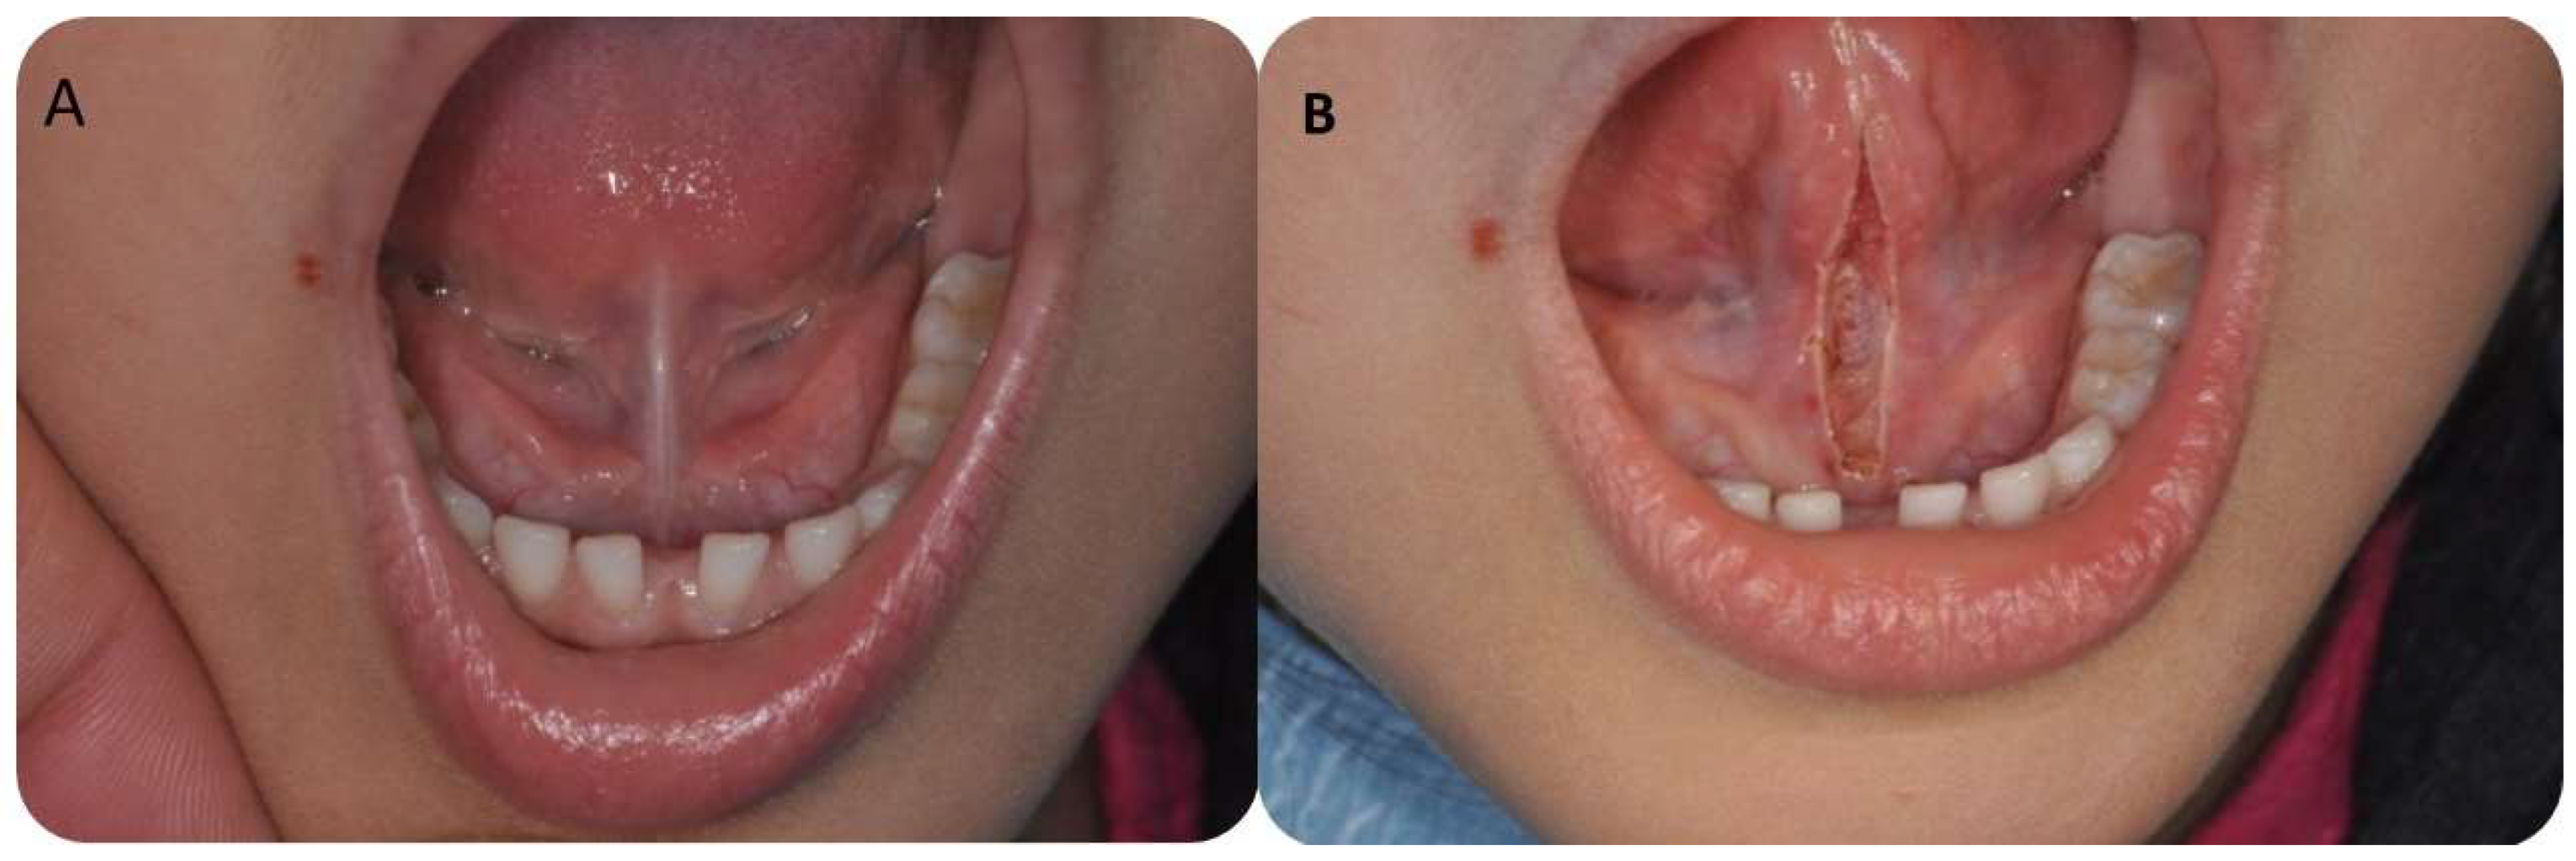 sublingual caruncle swelling